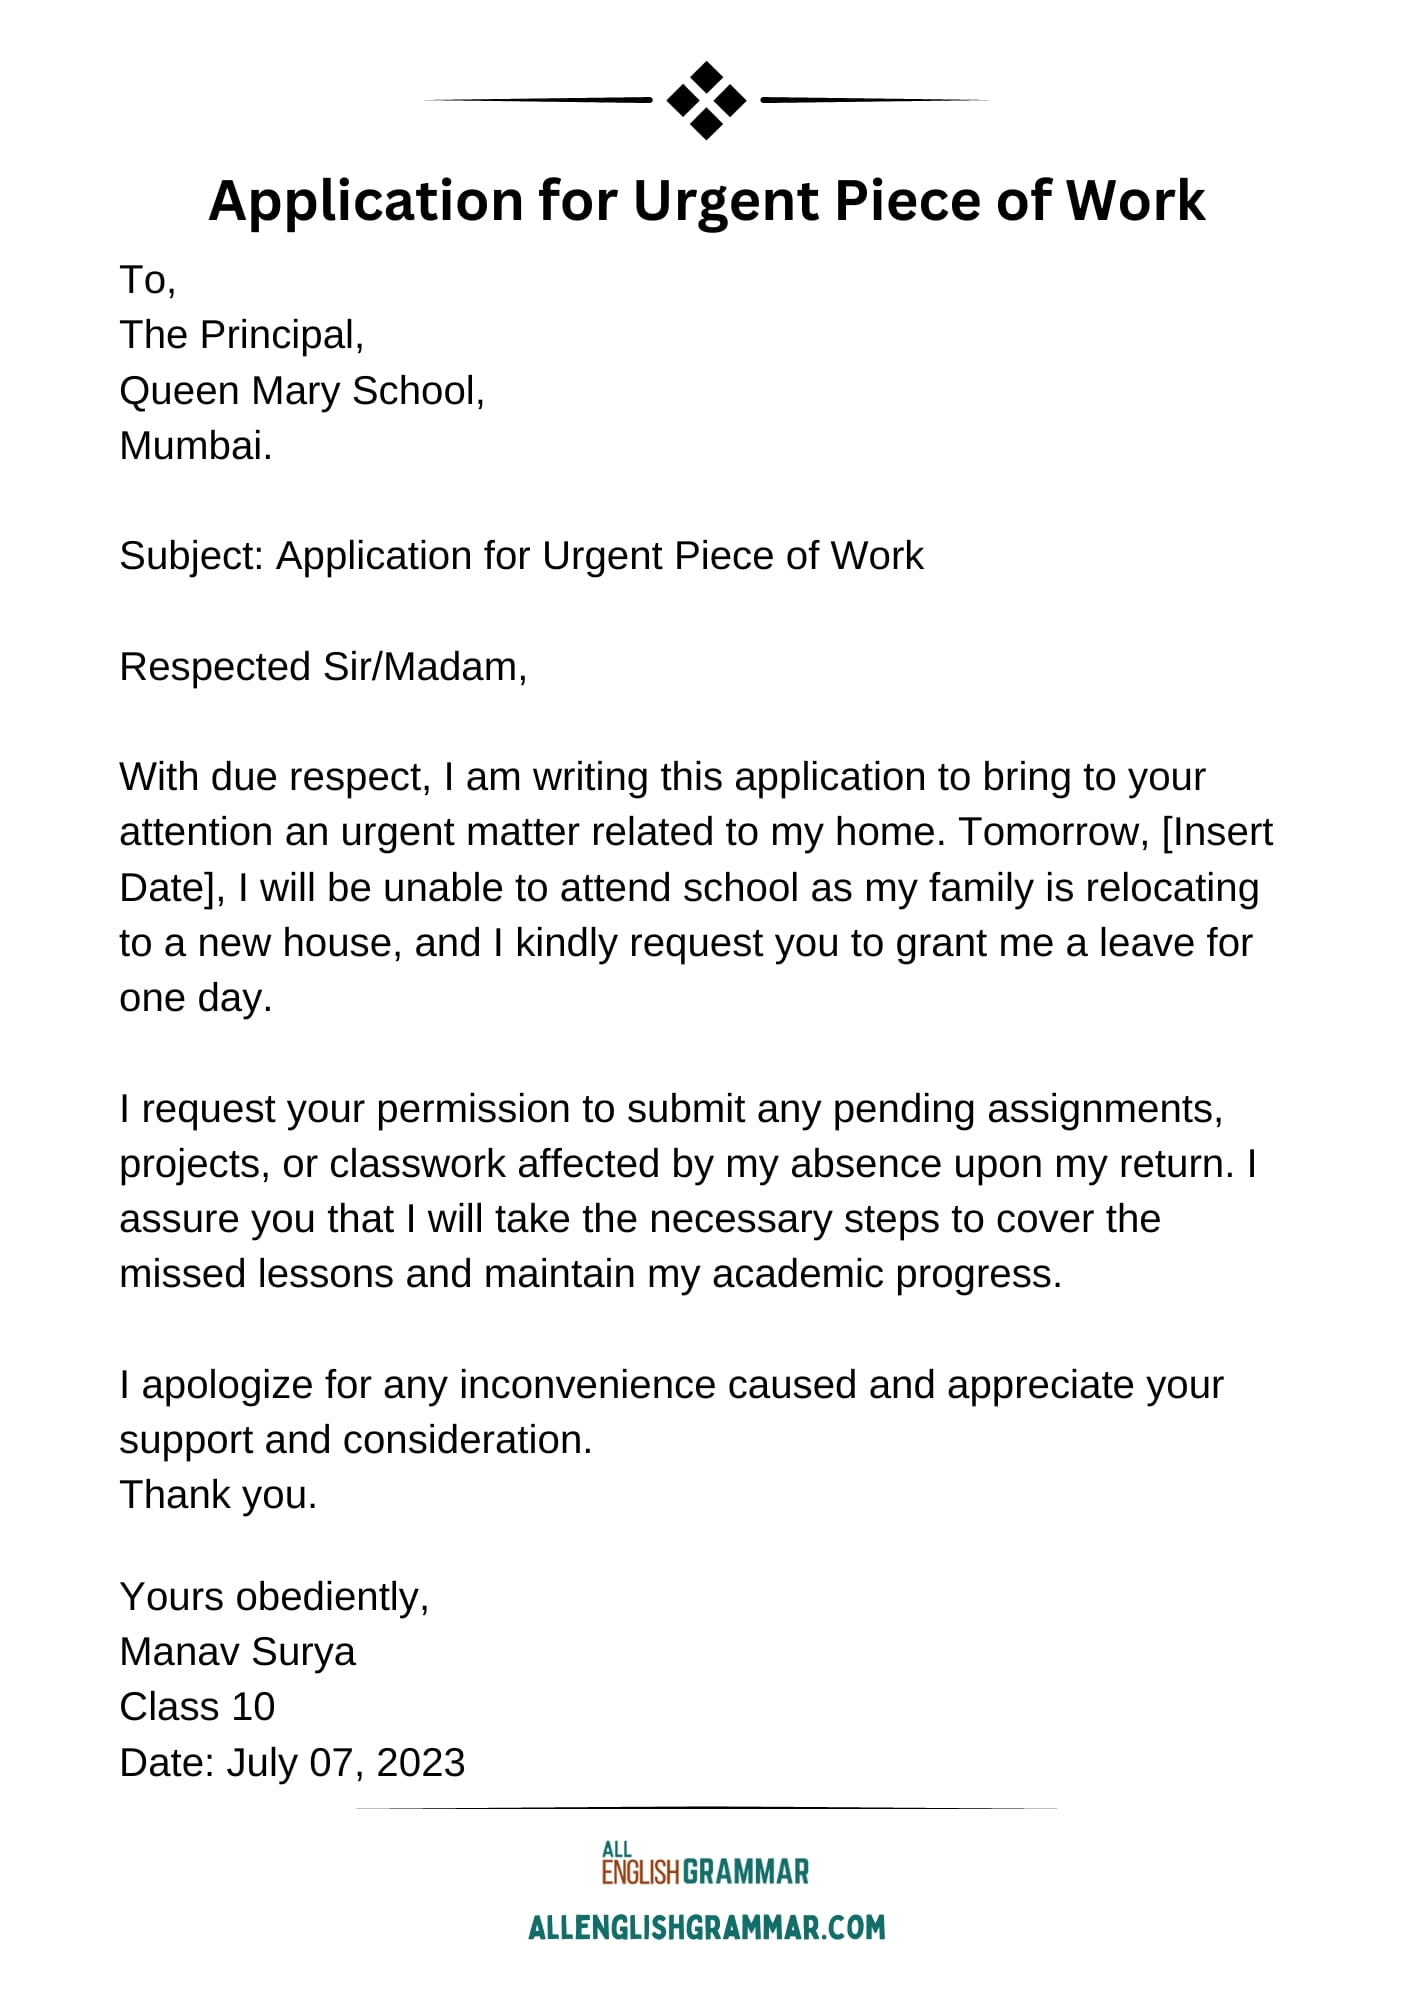 Leave Application for Urgent Piece of Work